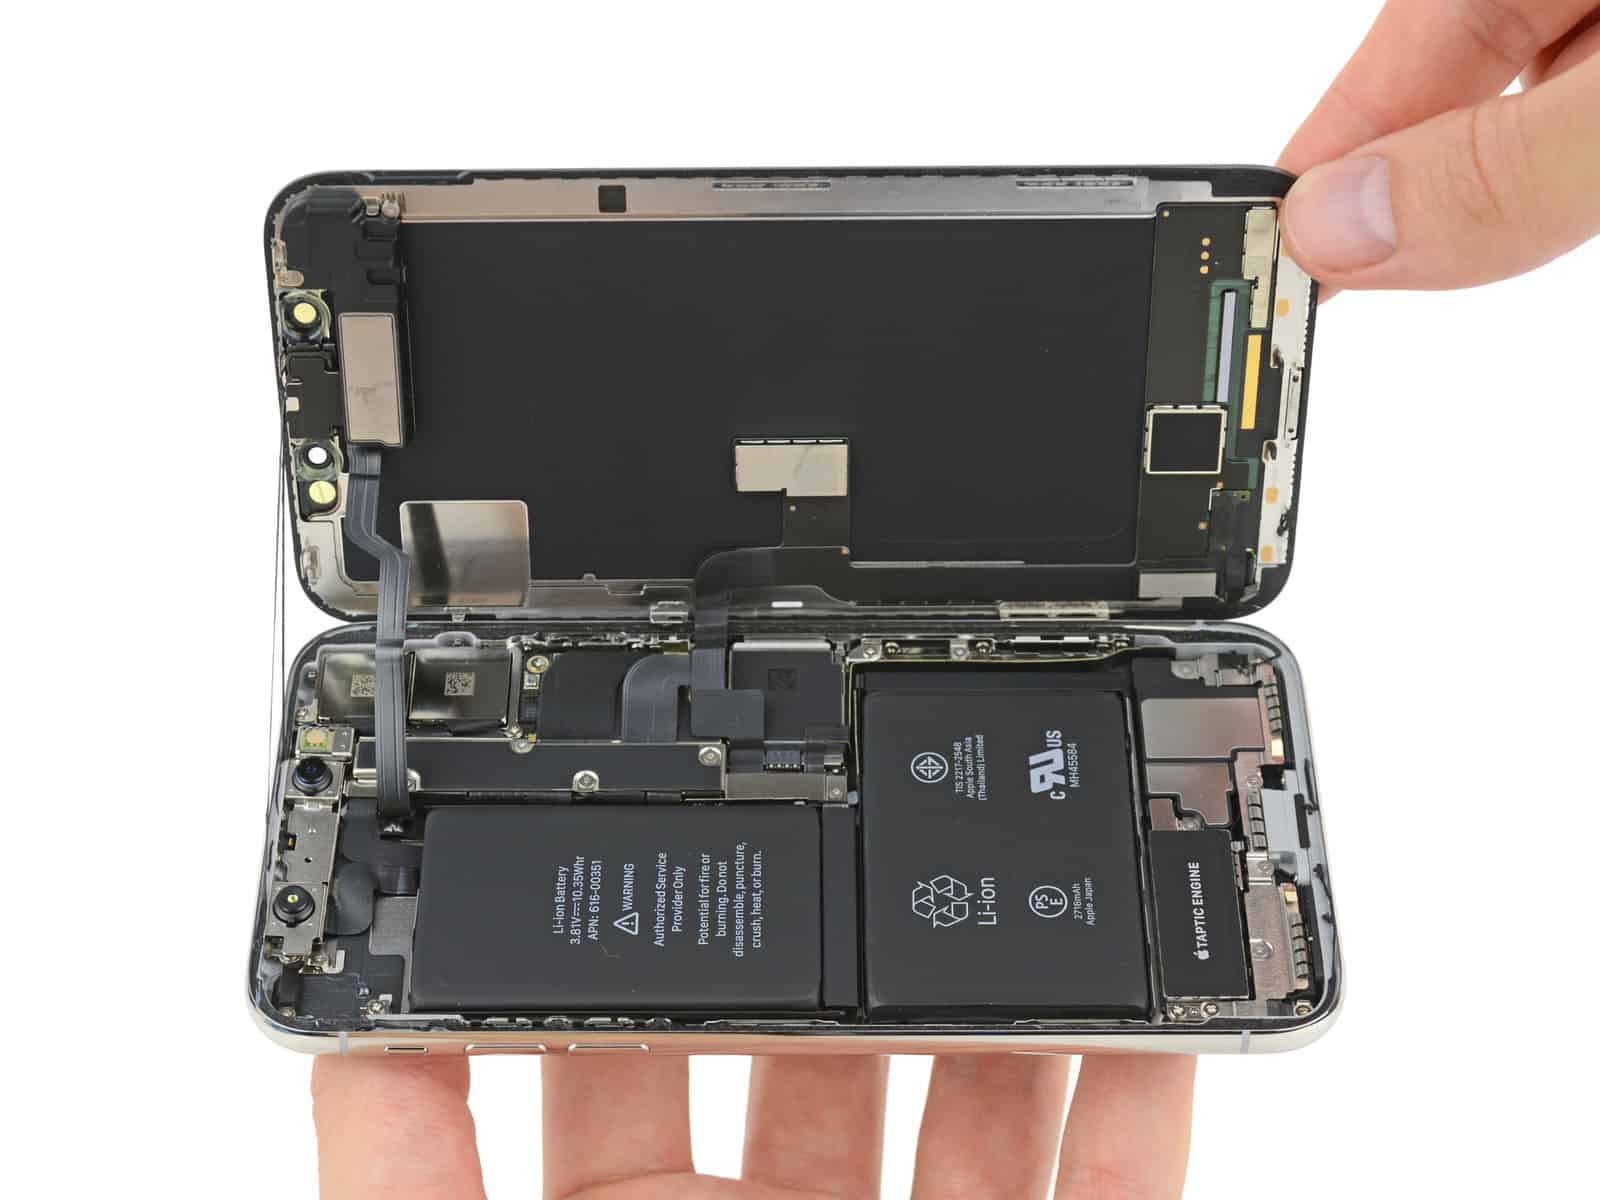 2018 iphone battery more than iphone